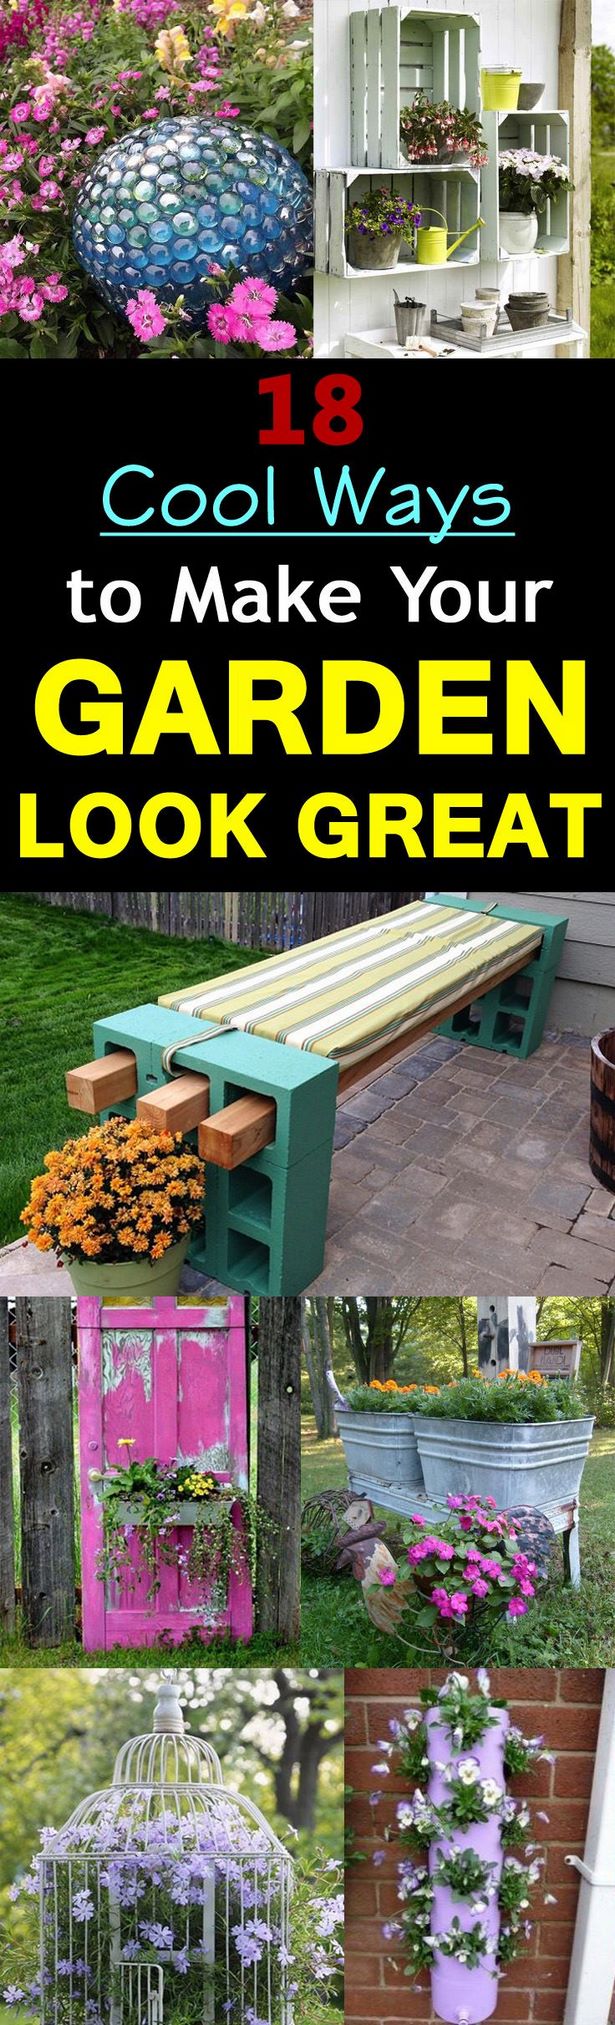 make-your-garden-look-nice-65_6 Направете градината си красива